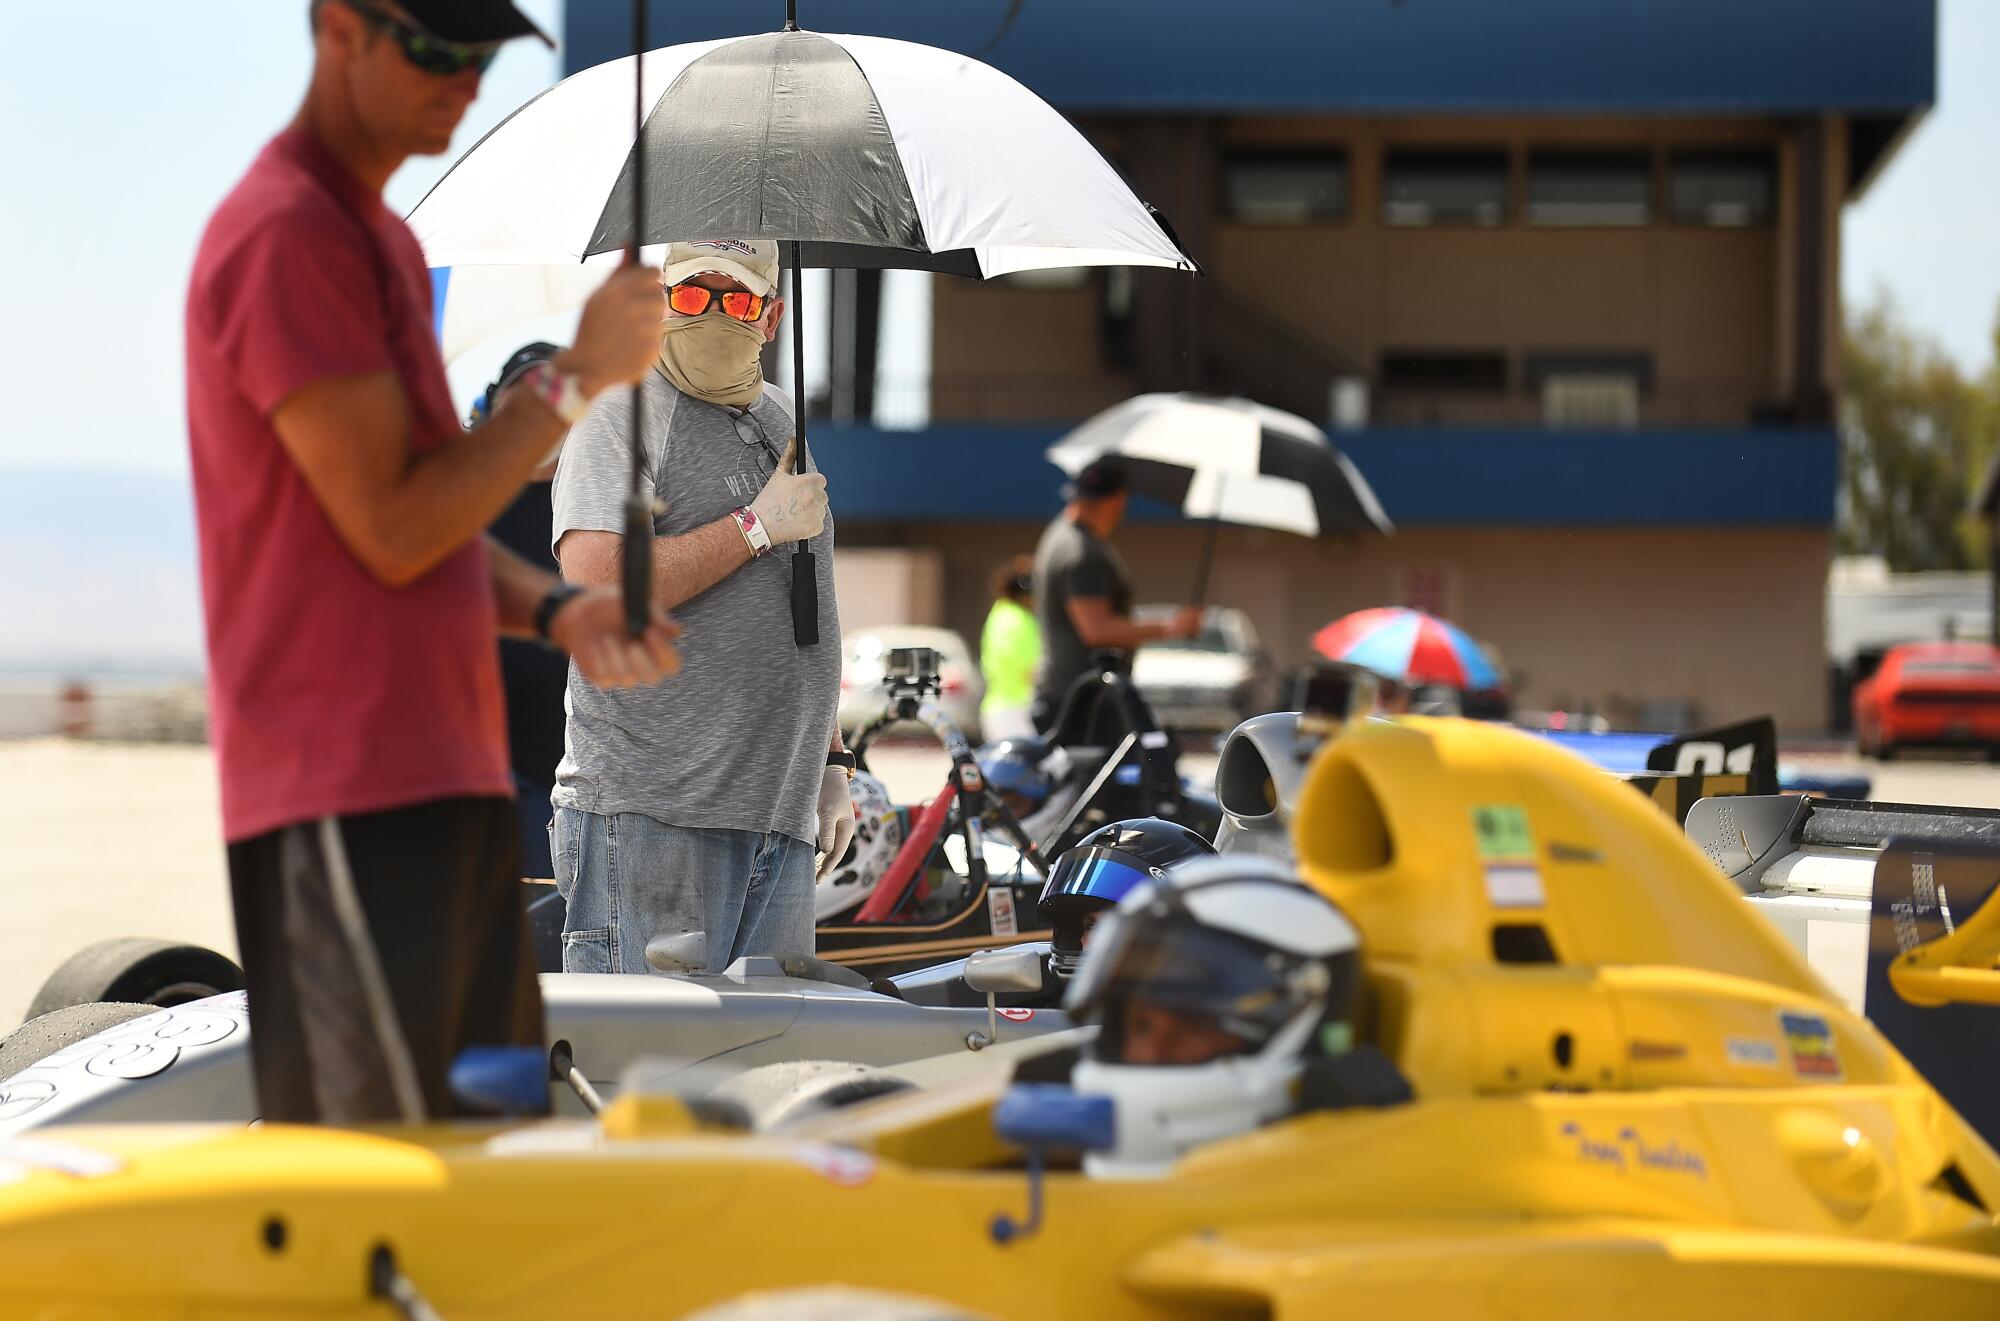 Race car team members help keep shade on their drivers before a race at Buttonwillow Raceway in Buttonwillow, Calif., on Saturday.